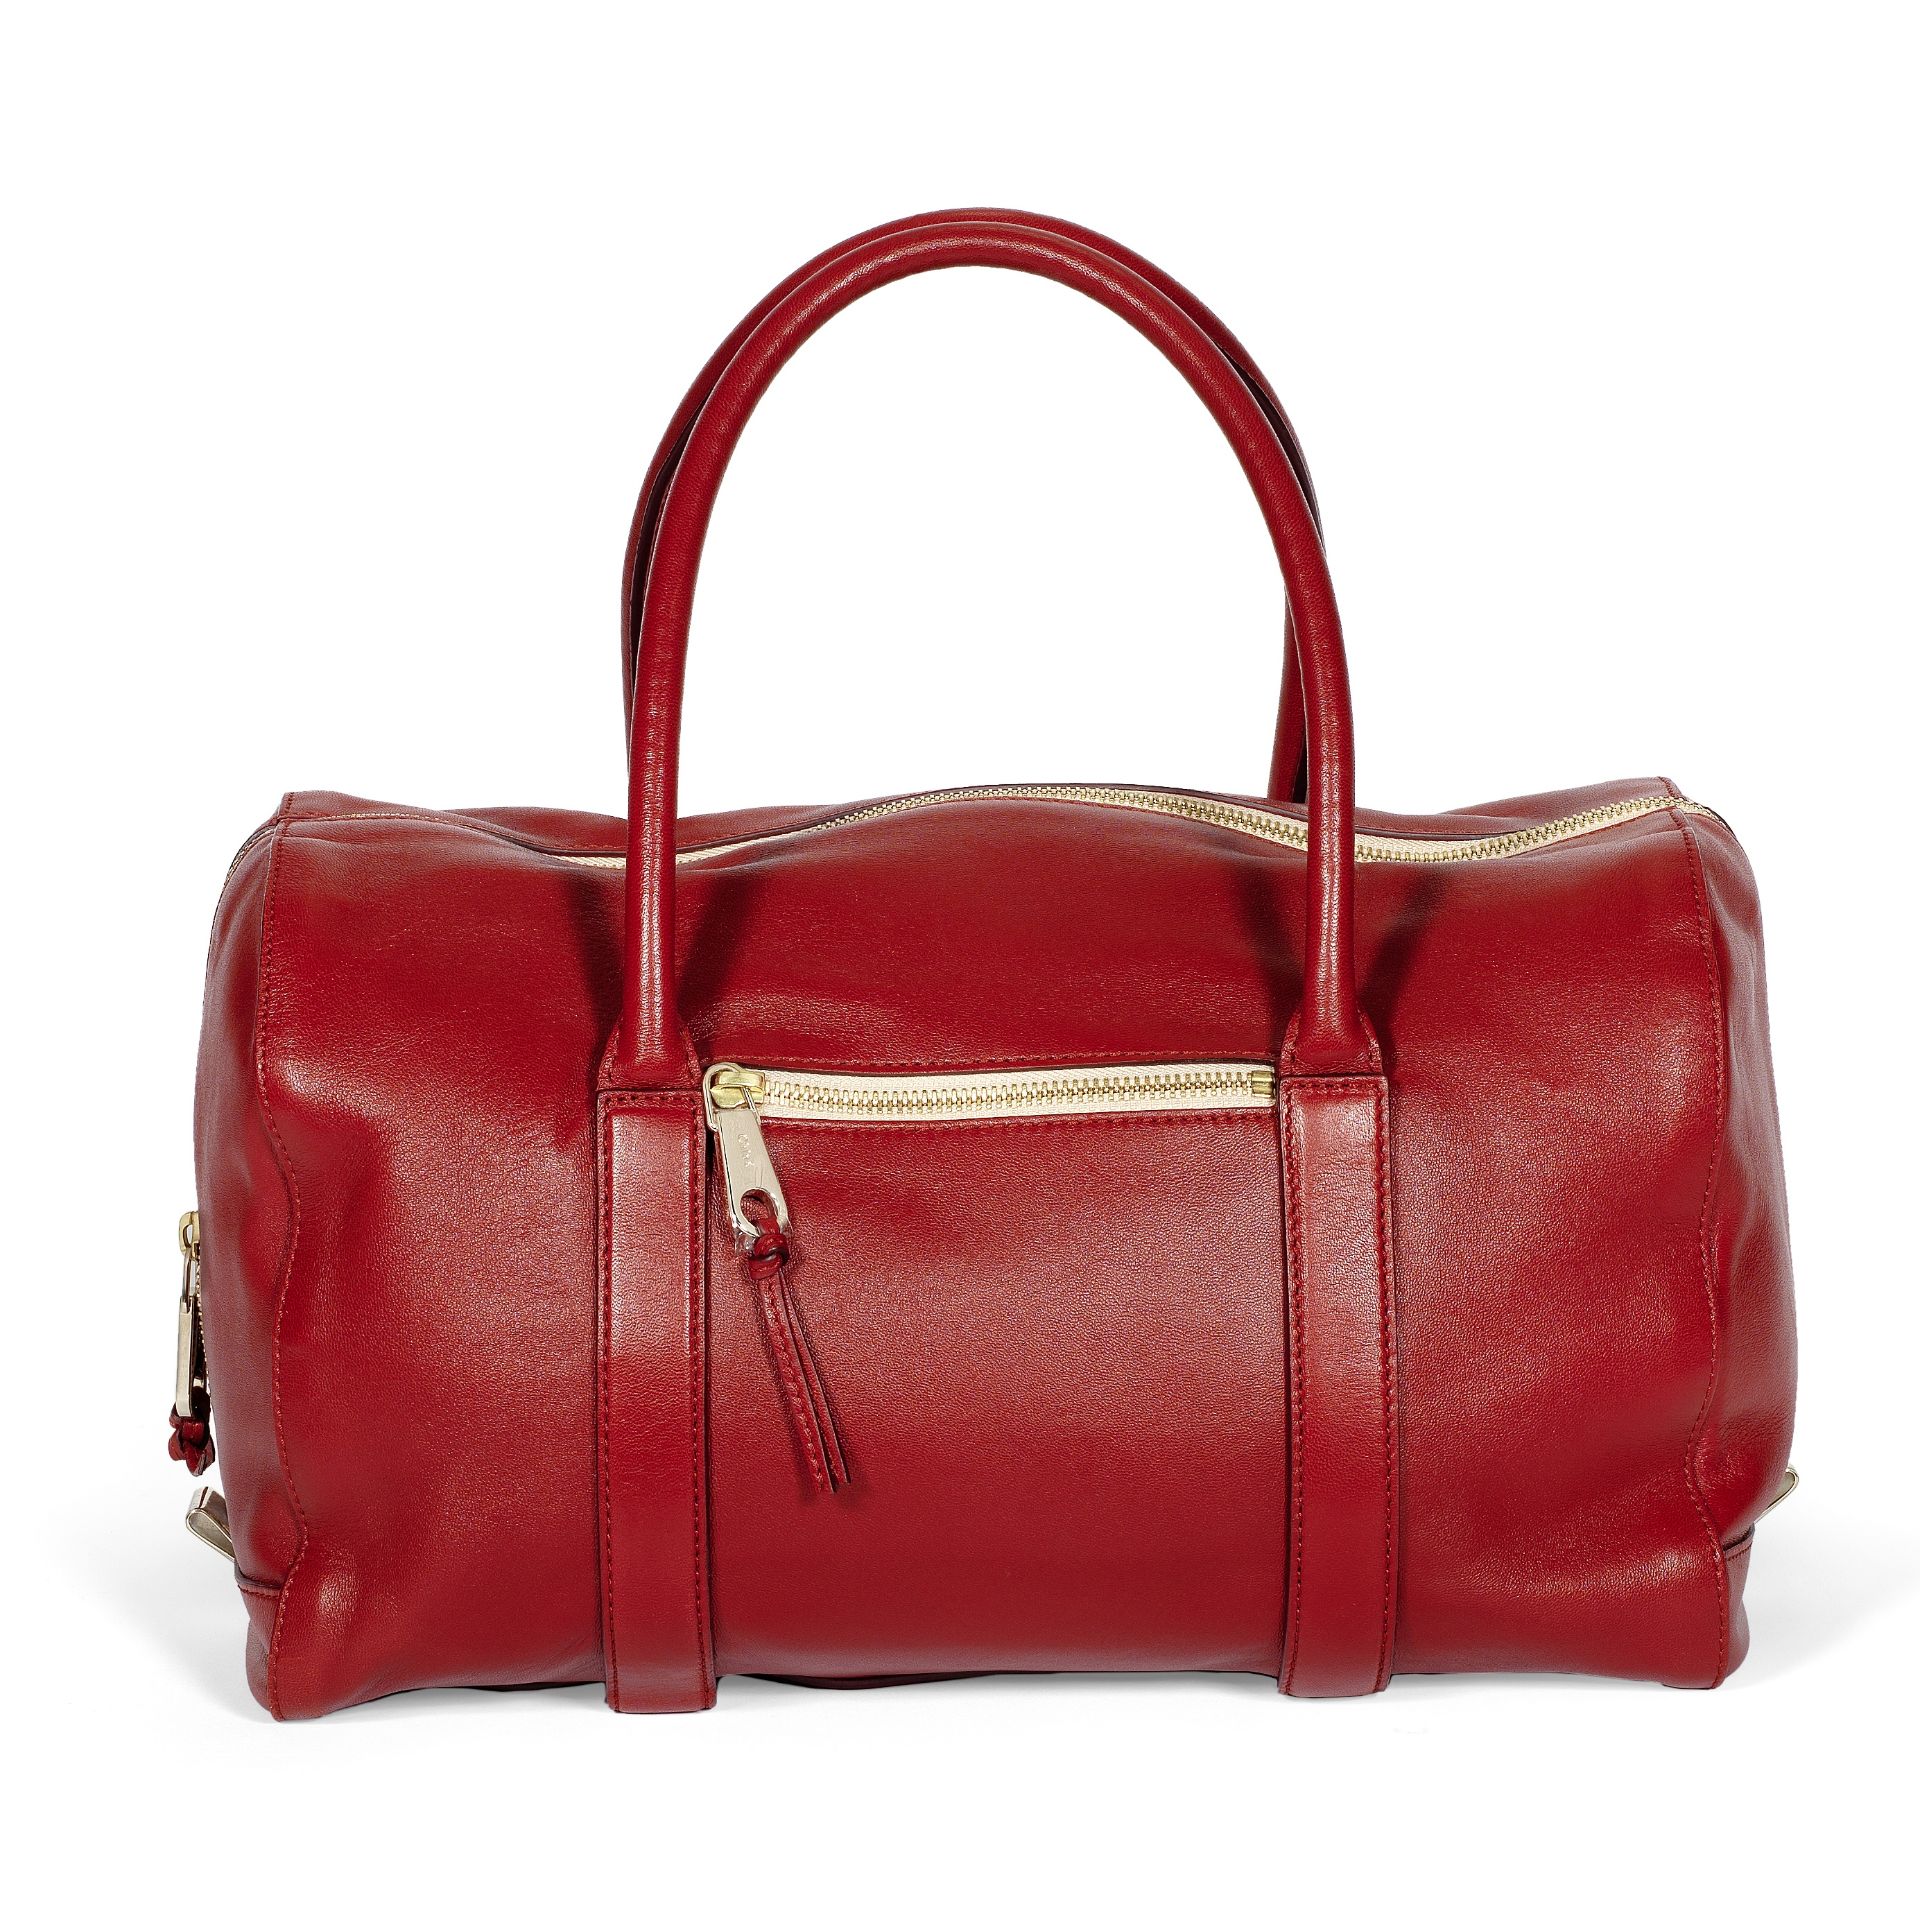 Dark Red Duffel Bag, Chloe, c. 2011, (Includes authenticity card and dust bag)